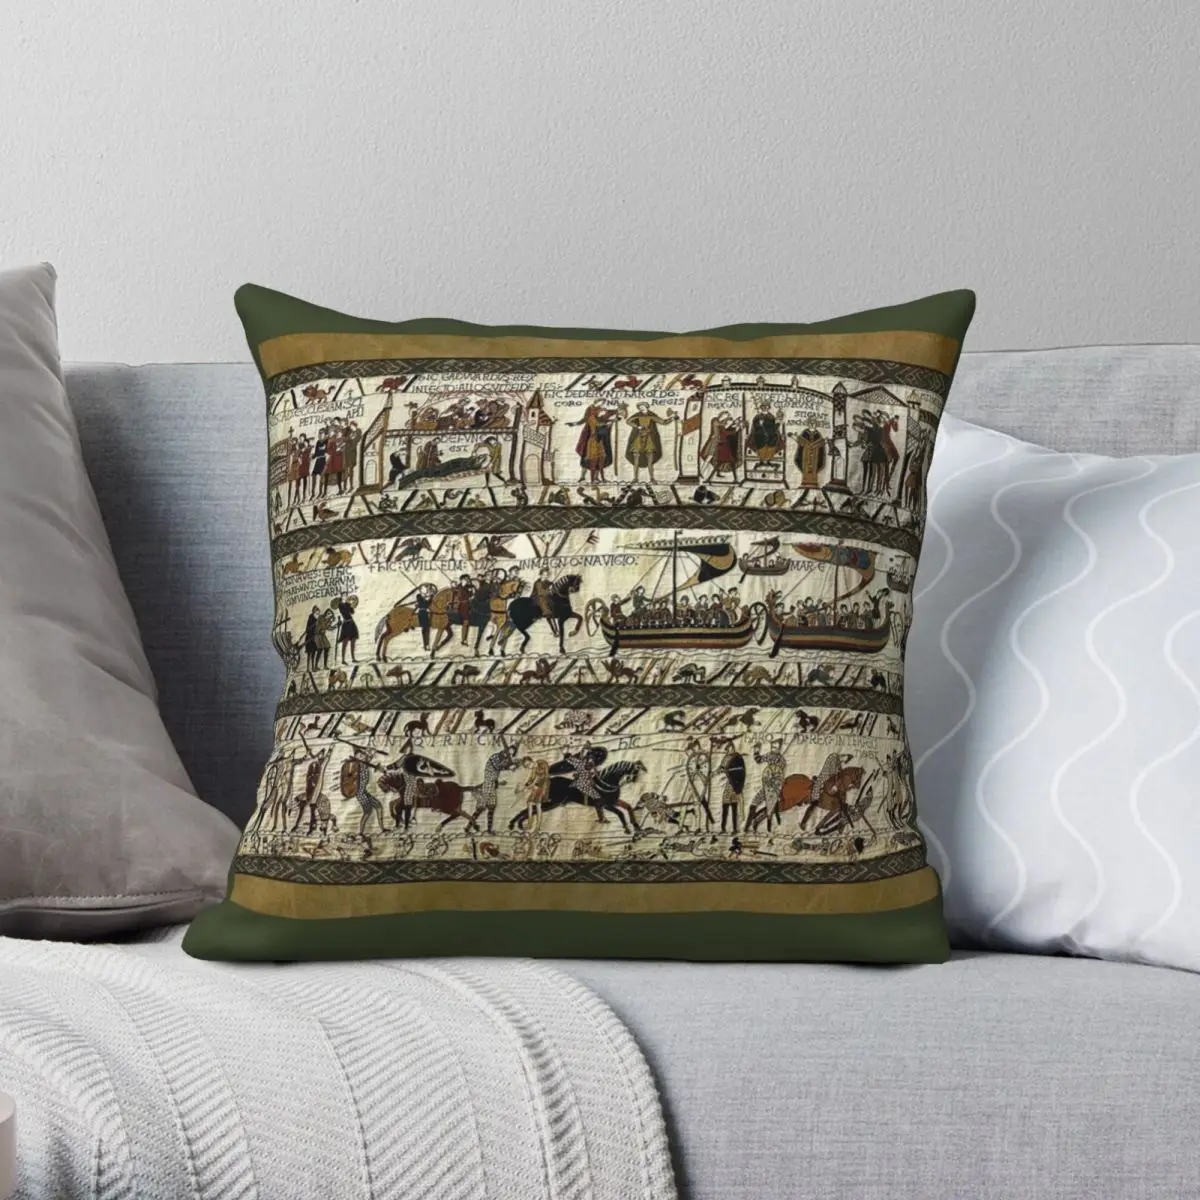 

Bayeux Tapestry Square Pillowcase Polyester Linen Velvet Pattern Zip Decor Pillow Case Home Cushion Cover 45x45